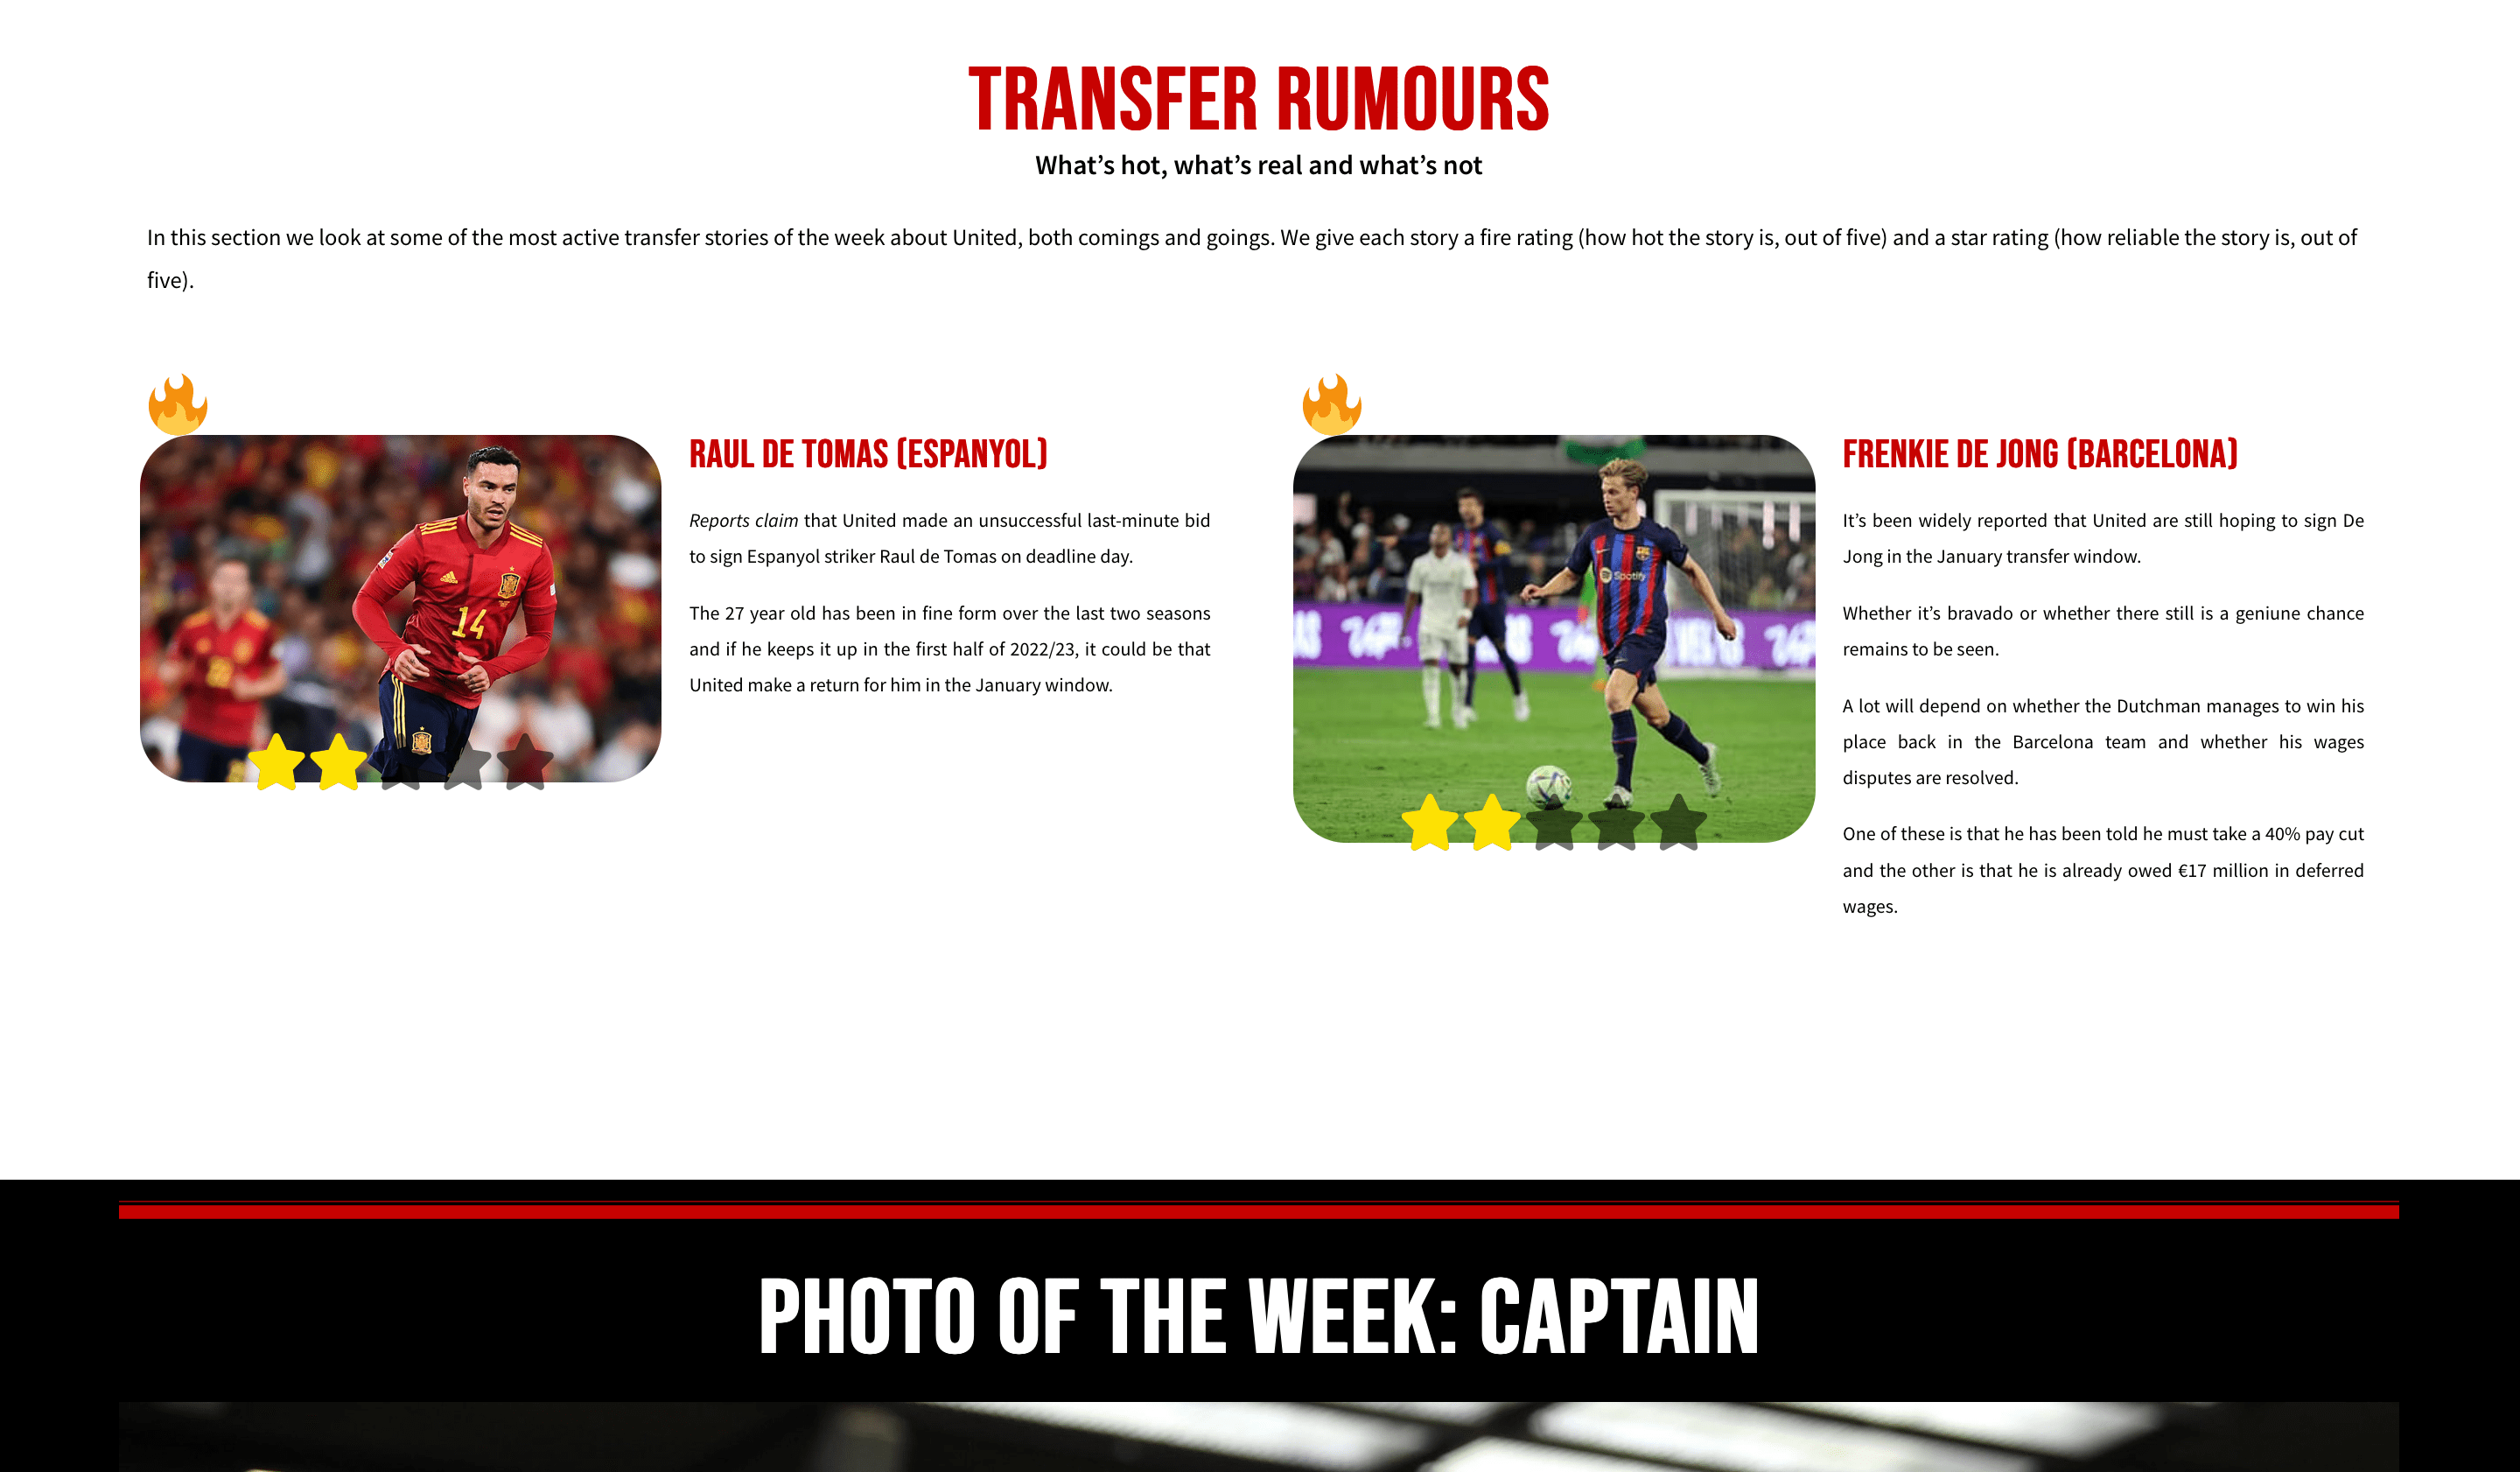 The real transfer news